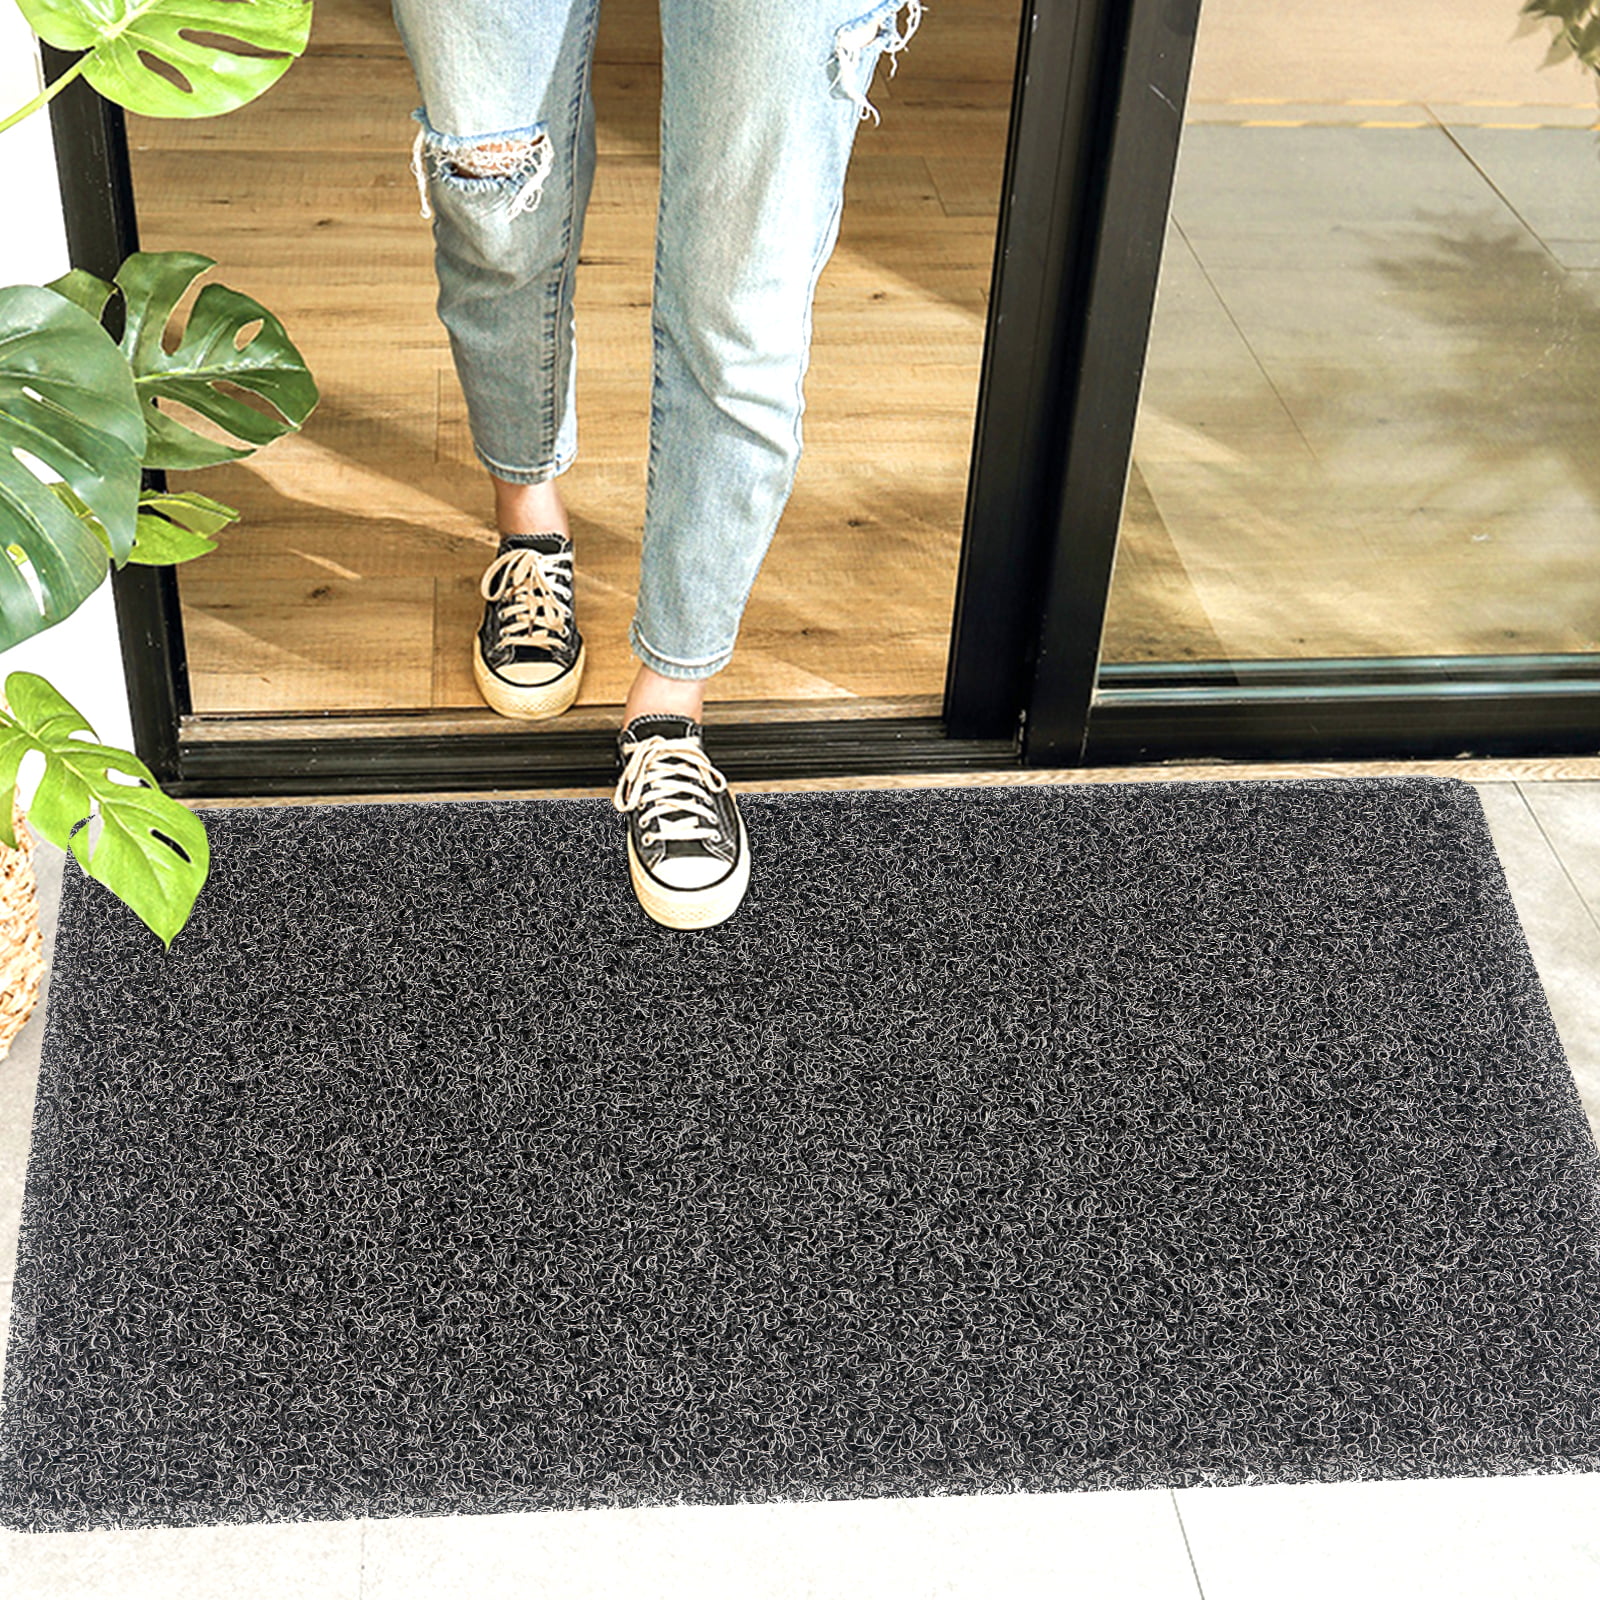 NEW WELCOME DURA MAT ALL WEATHER RUBBER MAT 16"X24" IN/OUTDOOR MAT NONE SKID 